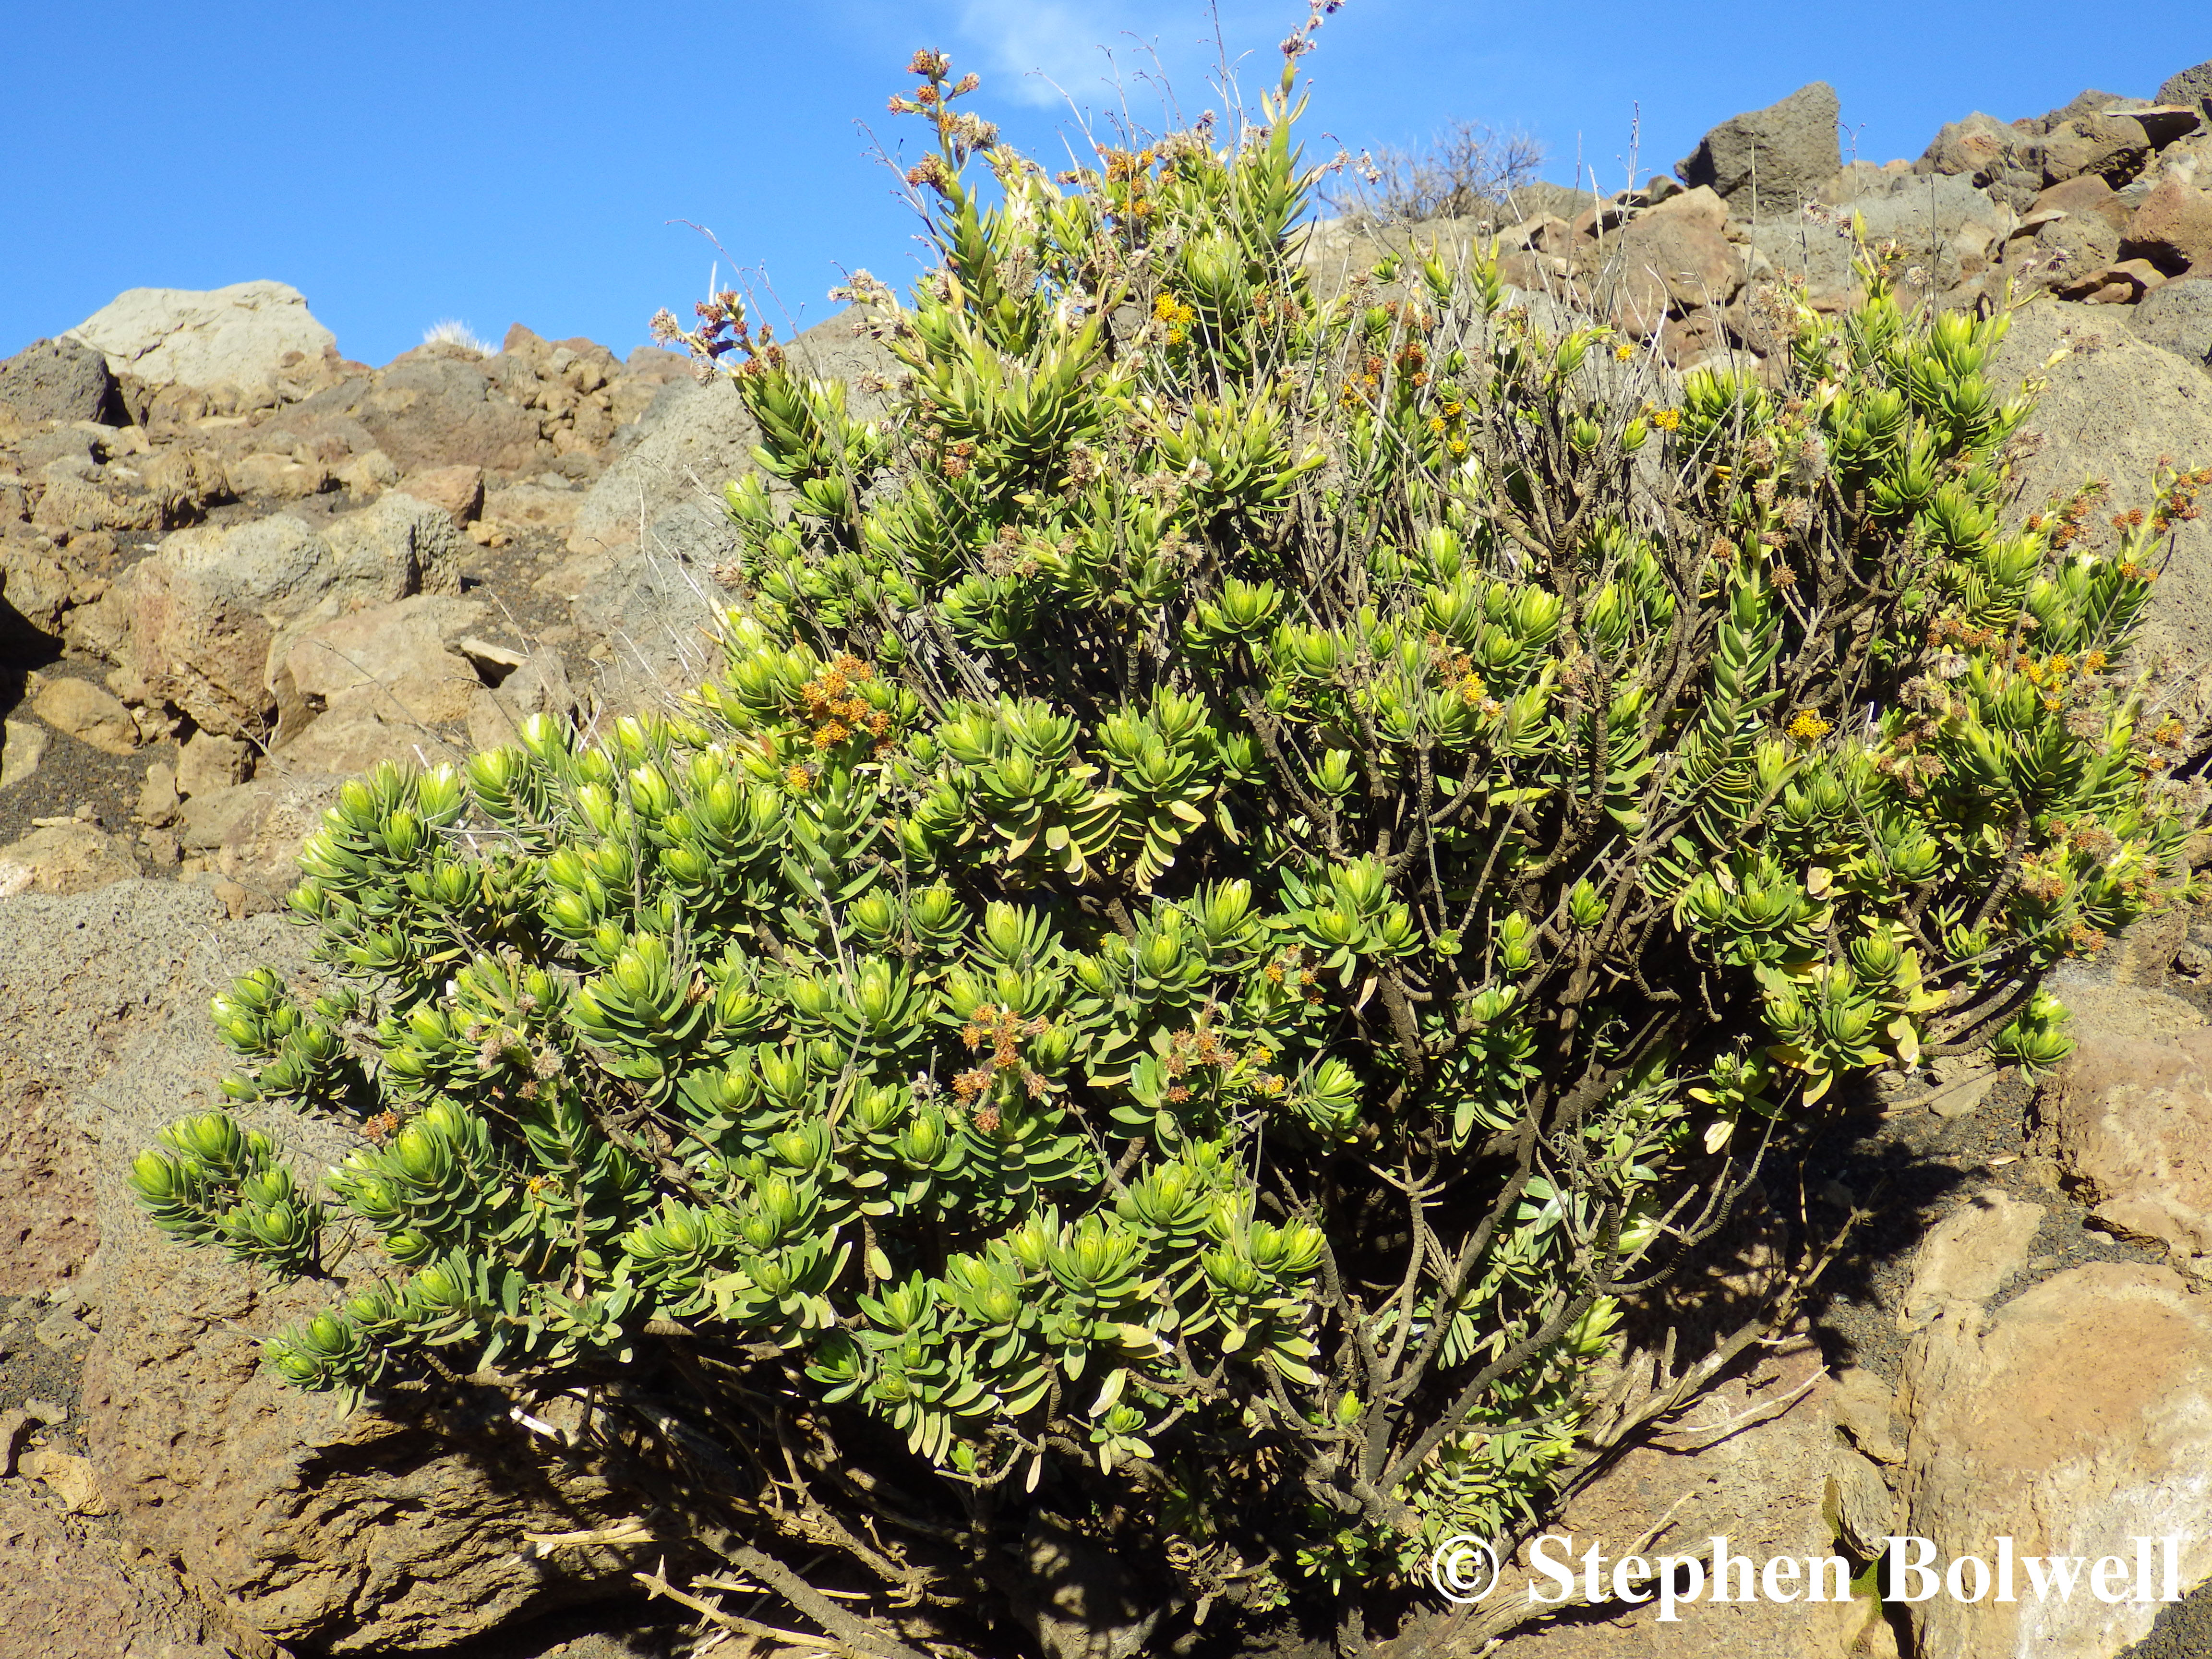 Another member of the silversword family is Dubautia menziesii. Less impressive in form It also grows up near the crater rim. They have evolved from a rather ordinary ancestral tar weed found in California which arrived on the Hawaiian Islands some time in the distant past.